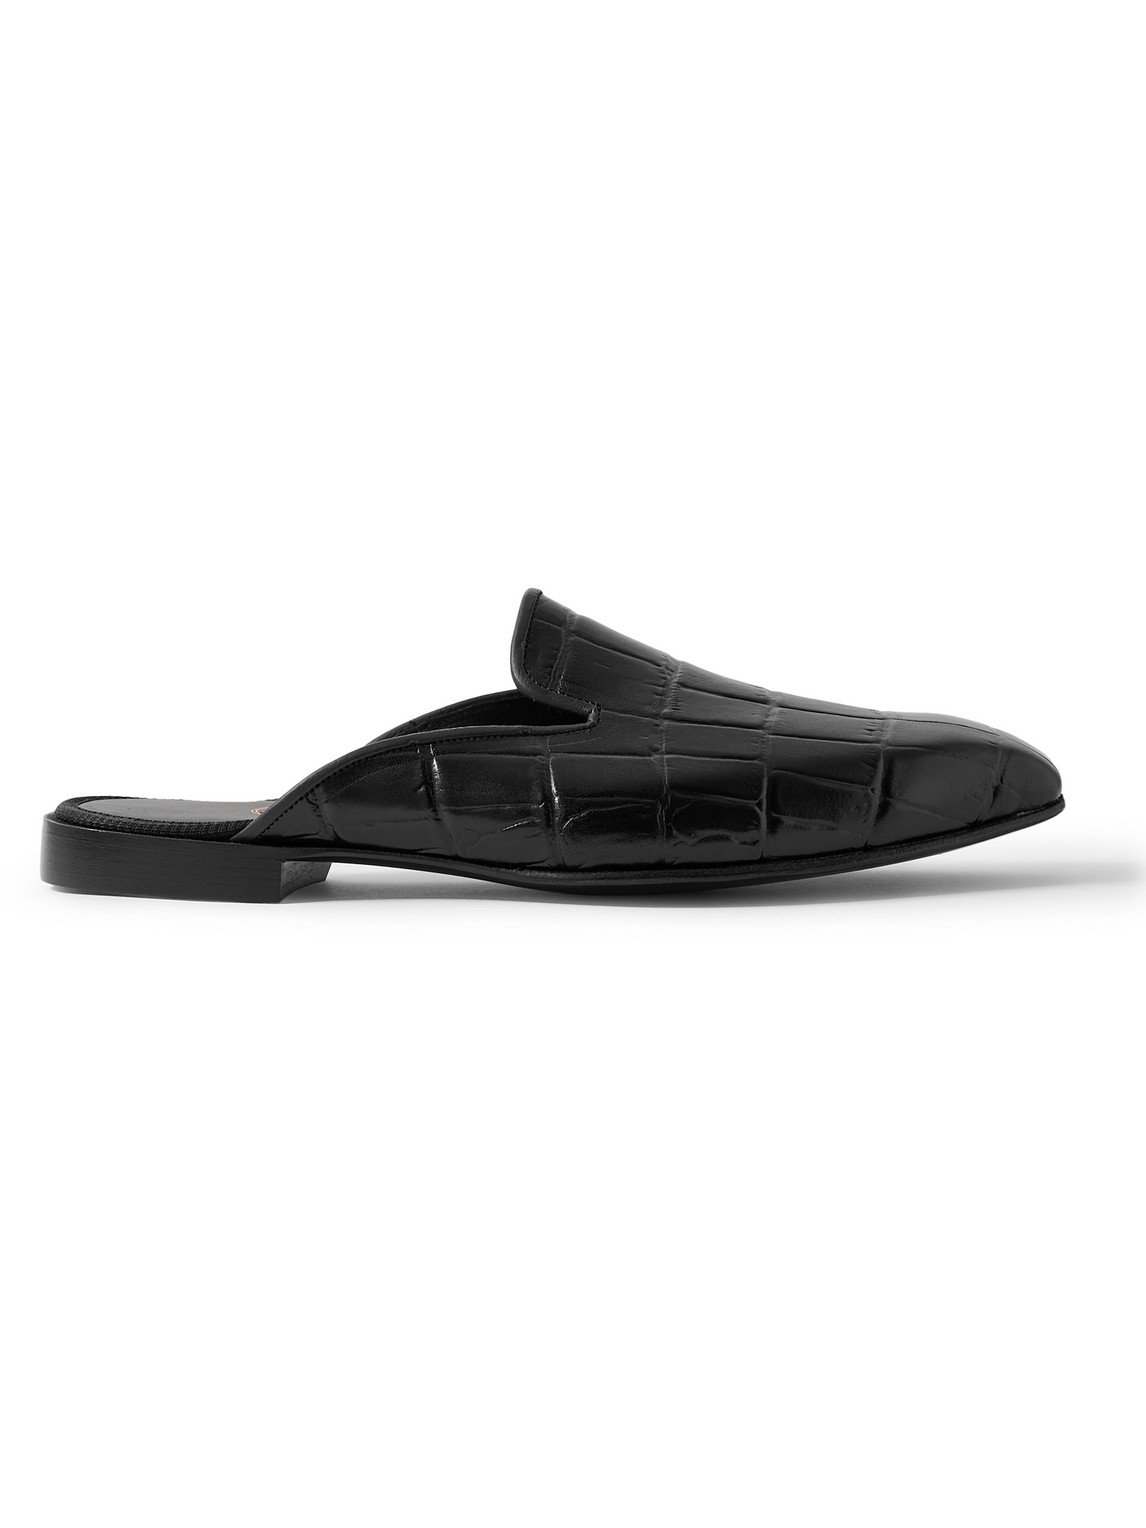 George Cleverley - Croc-Effect Leather Backless Loafers - Men - Black - UK 7 von George Cleverley